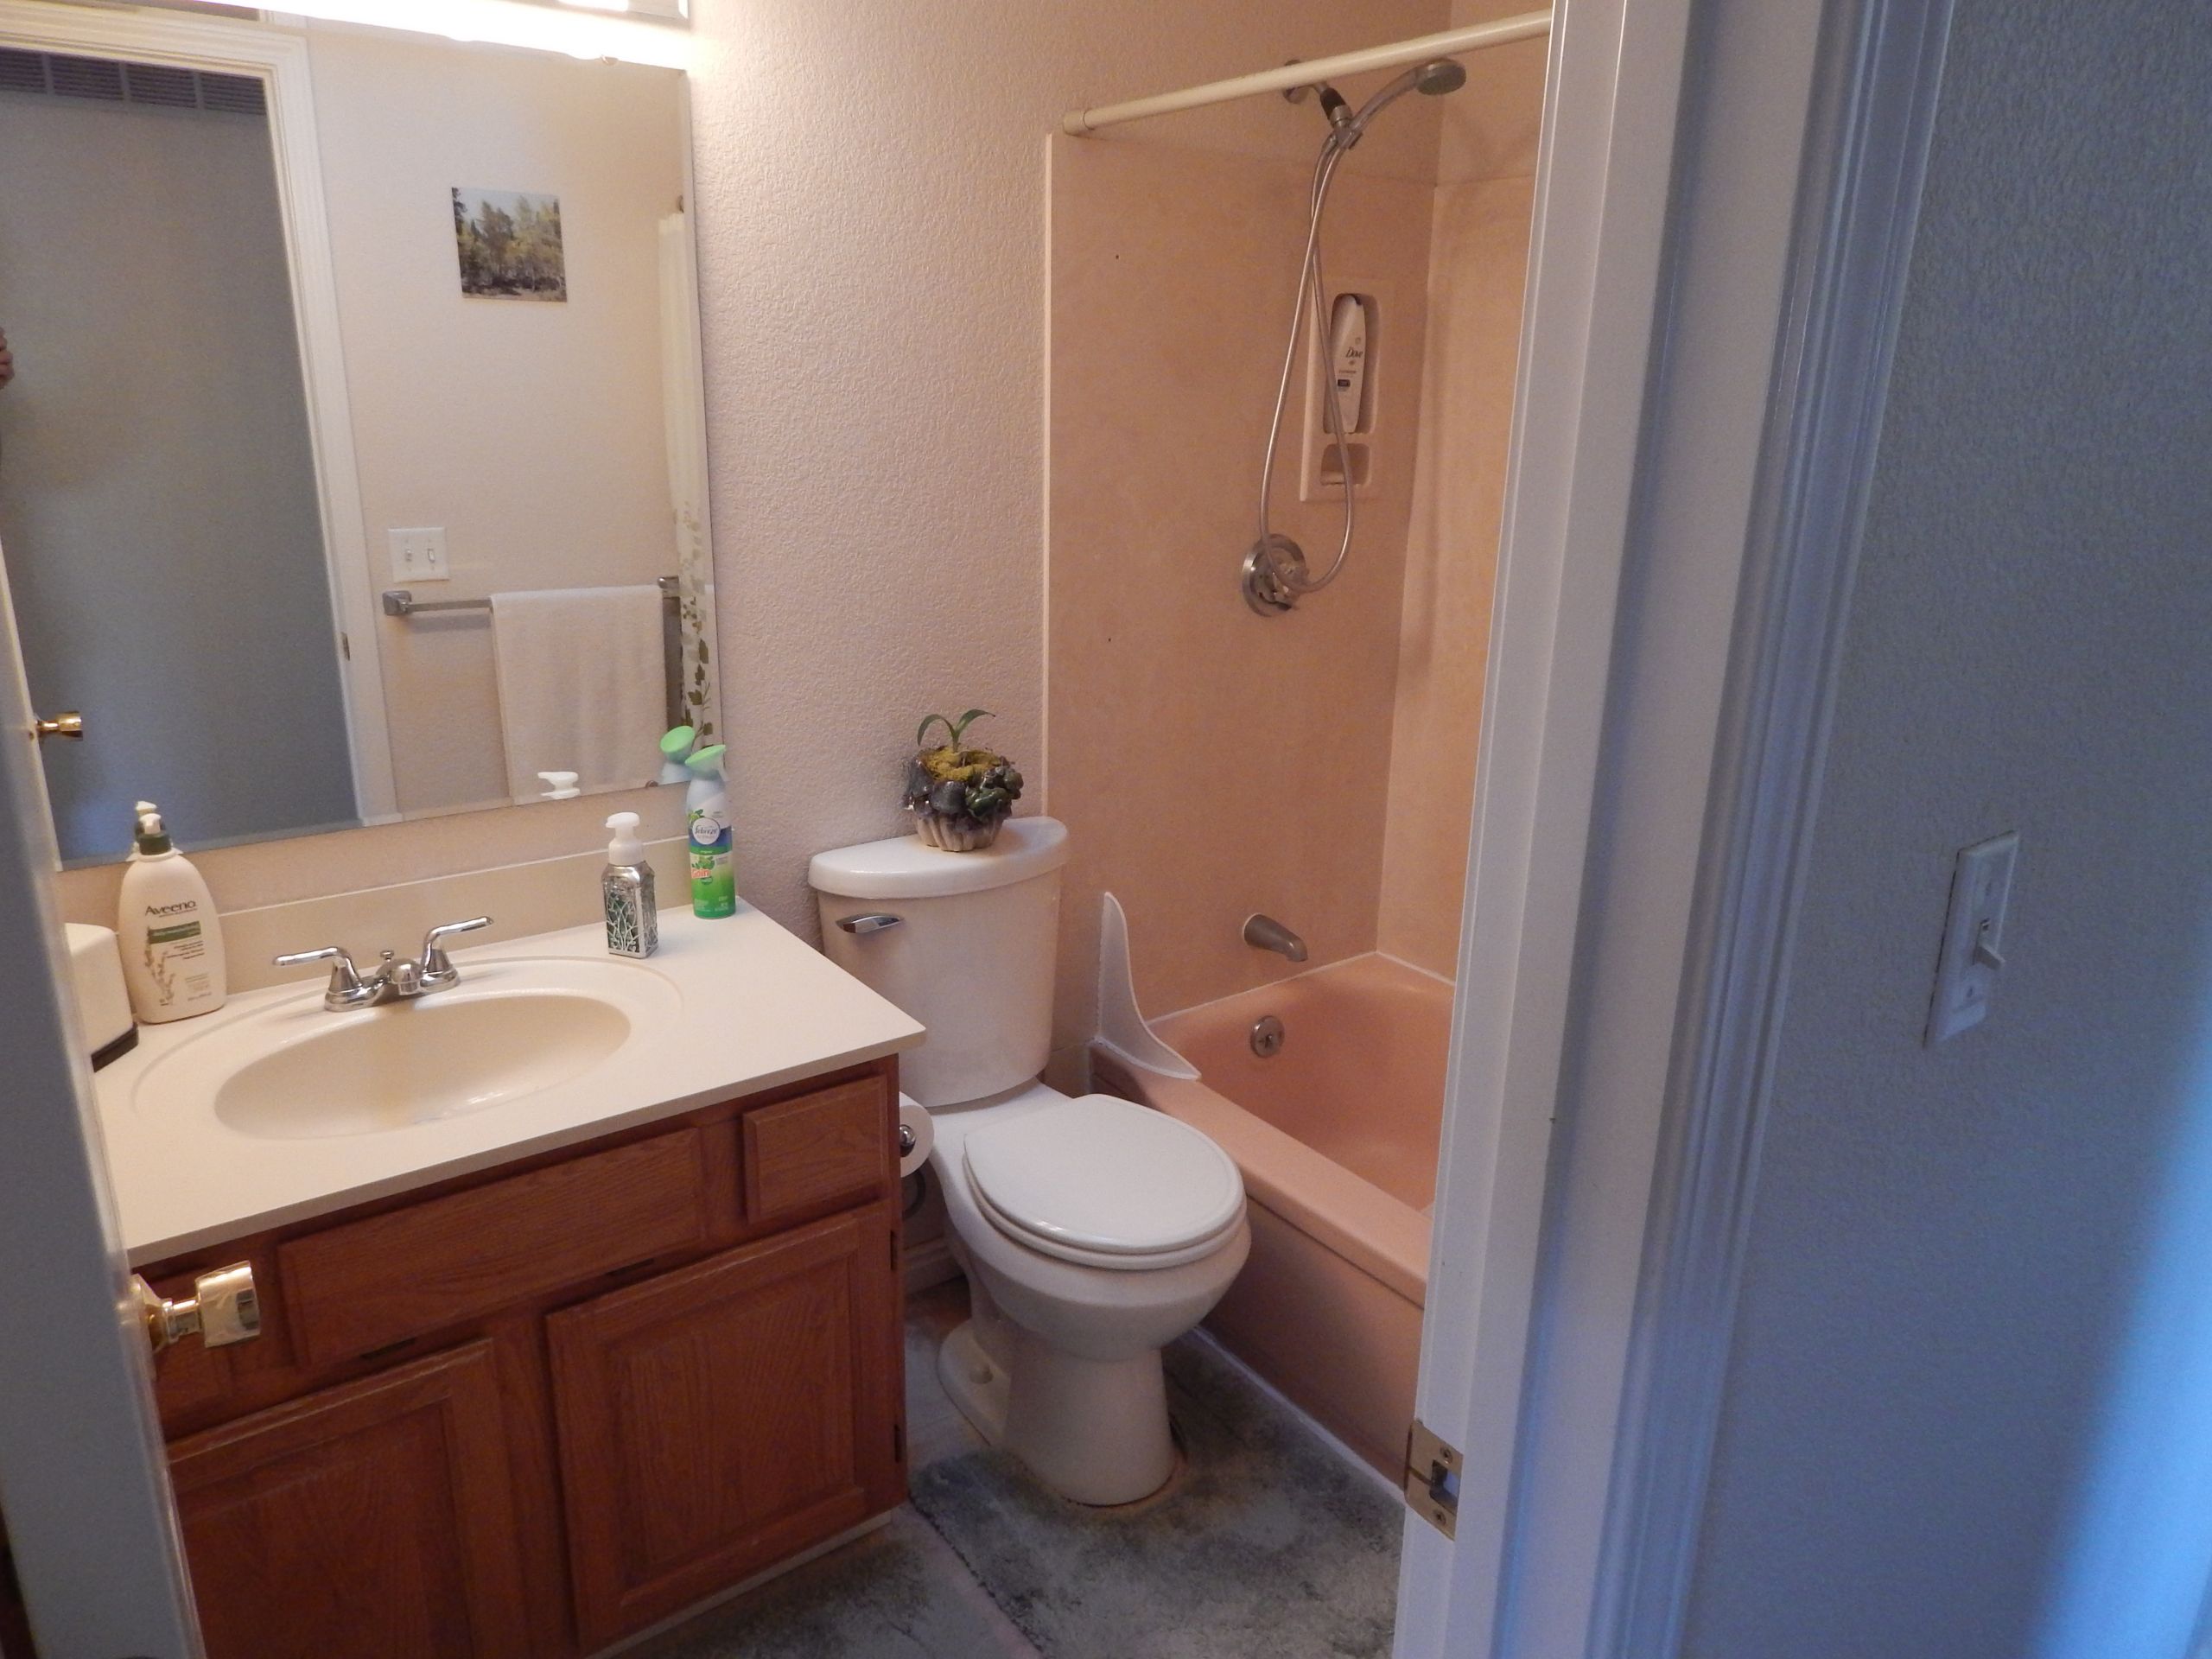 Picture Of Bathroom Showers
 Recent Bathroom Remodel Projects